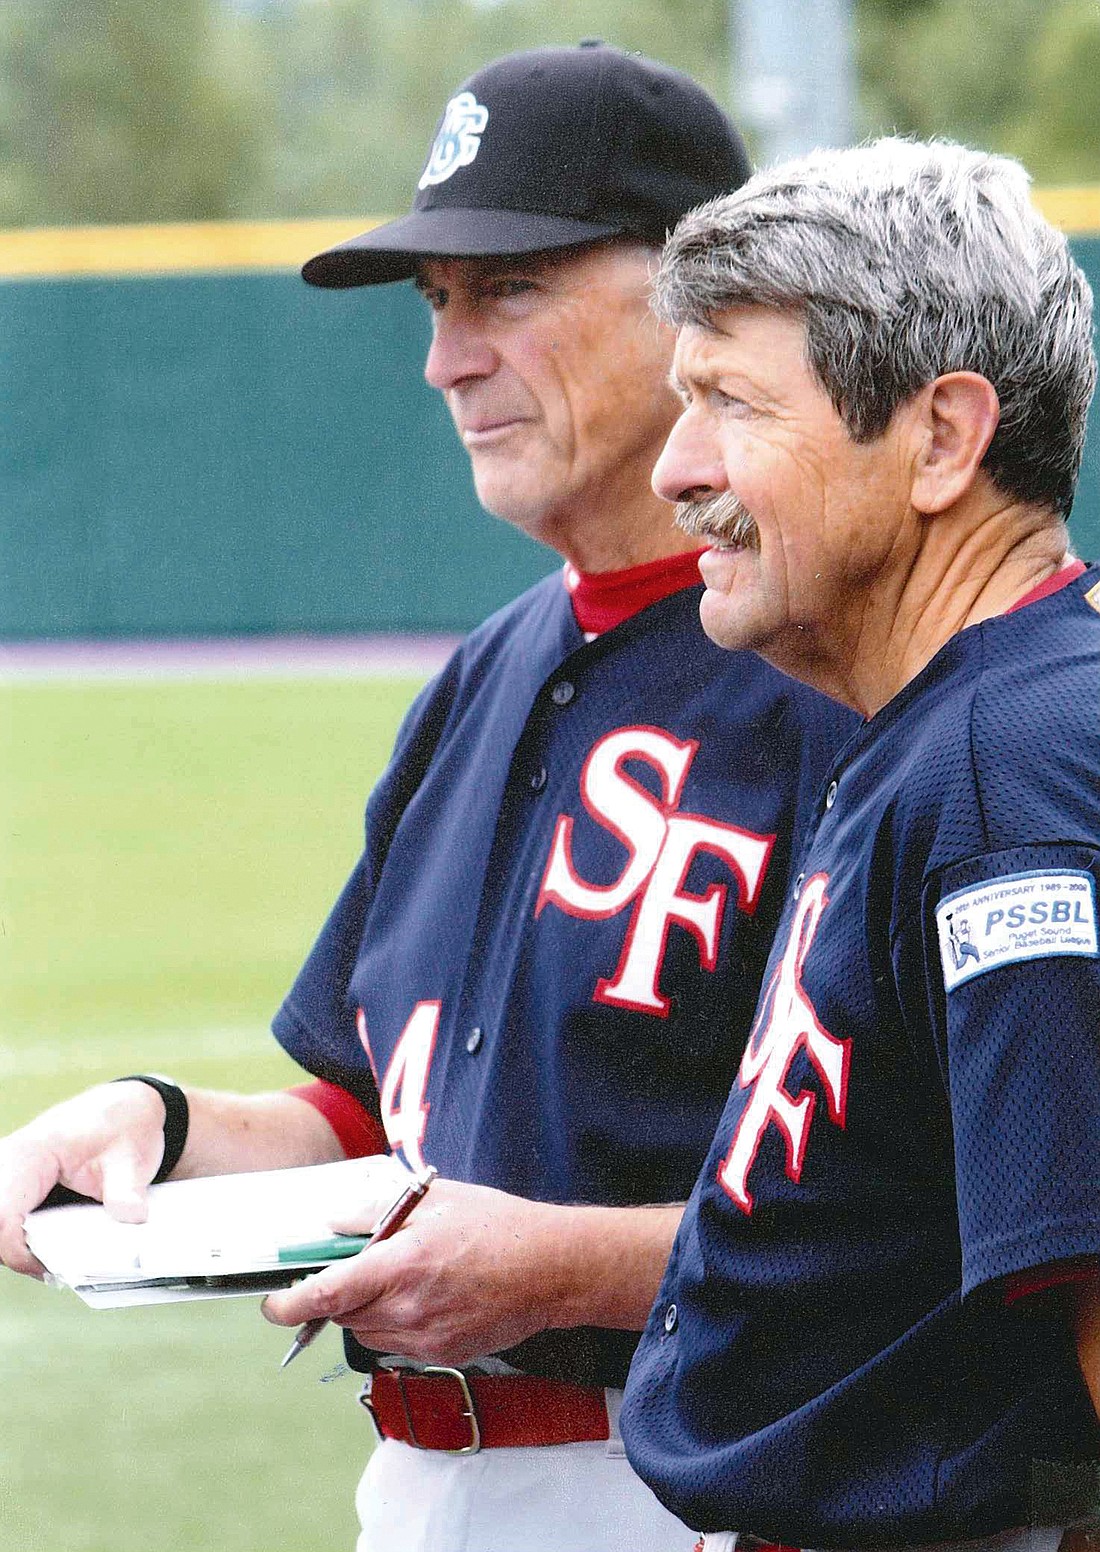 Dick Fitzgerald (l) and Ken Combs are a formidable pitcher/catcher duo in the Puget Sound Senior Baseball League. Photo courtesy of Ken & Susanne Combs